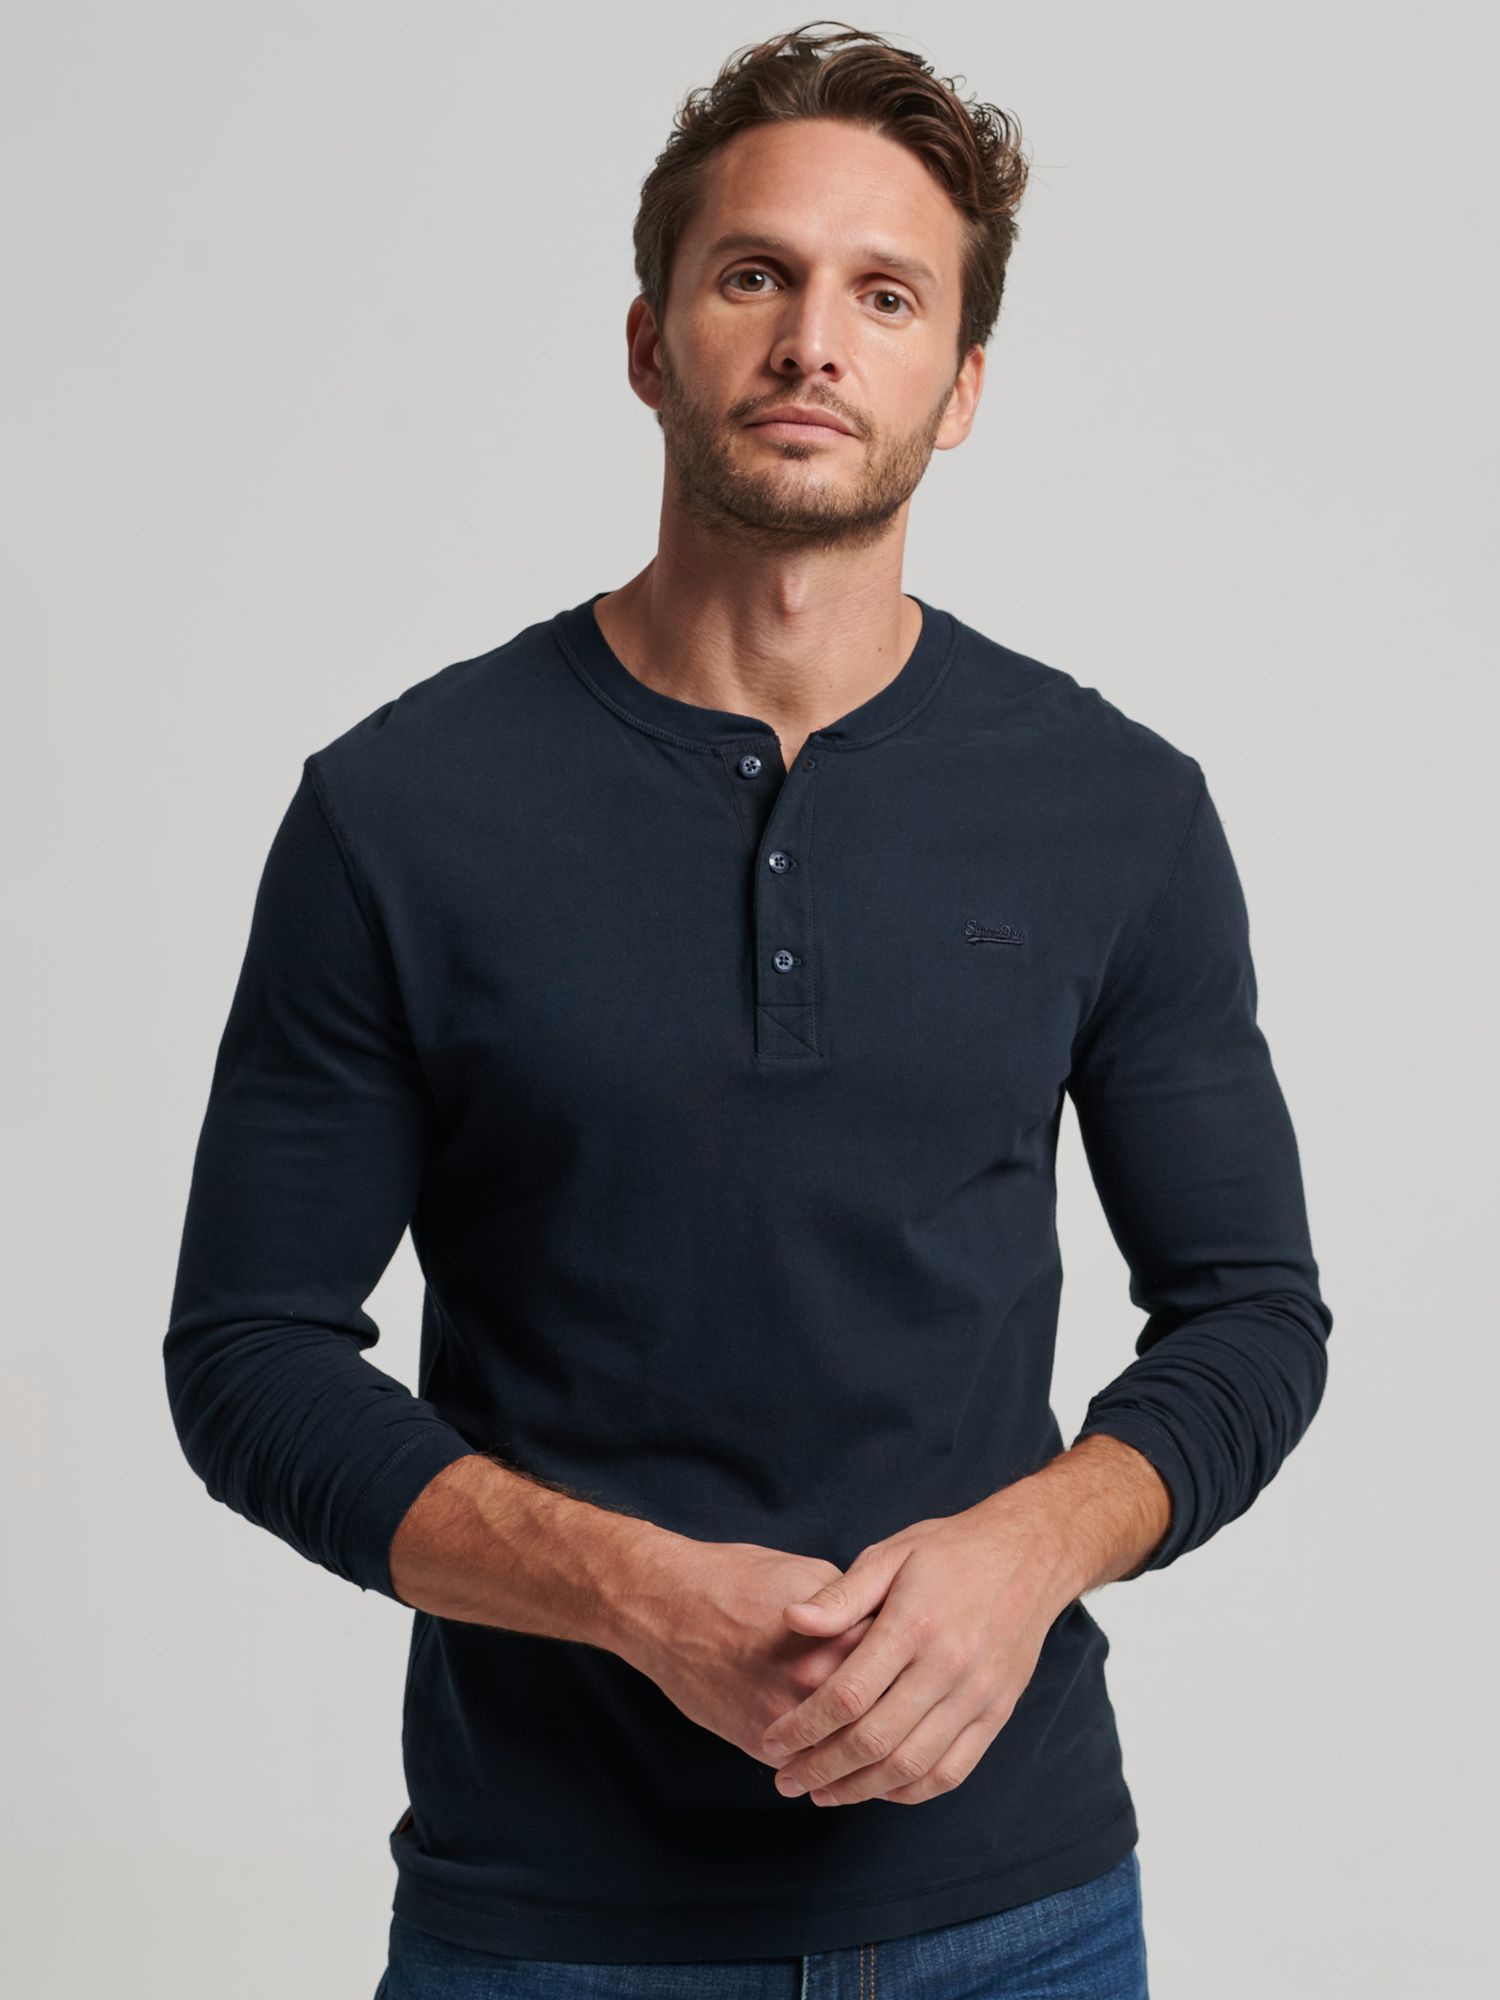 Superdry Organic Cotton Henley Long Sleeve T-Shirt, Mid Navy at